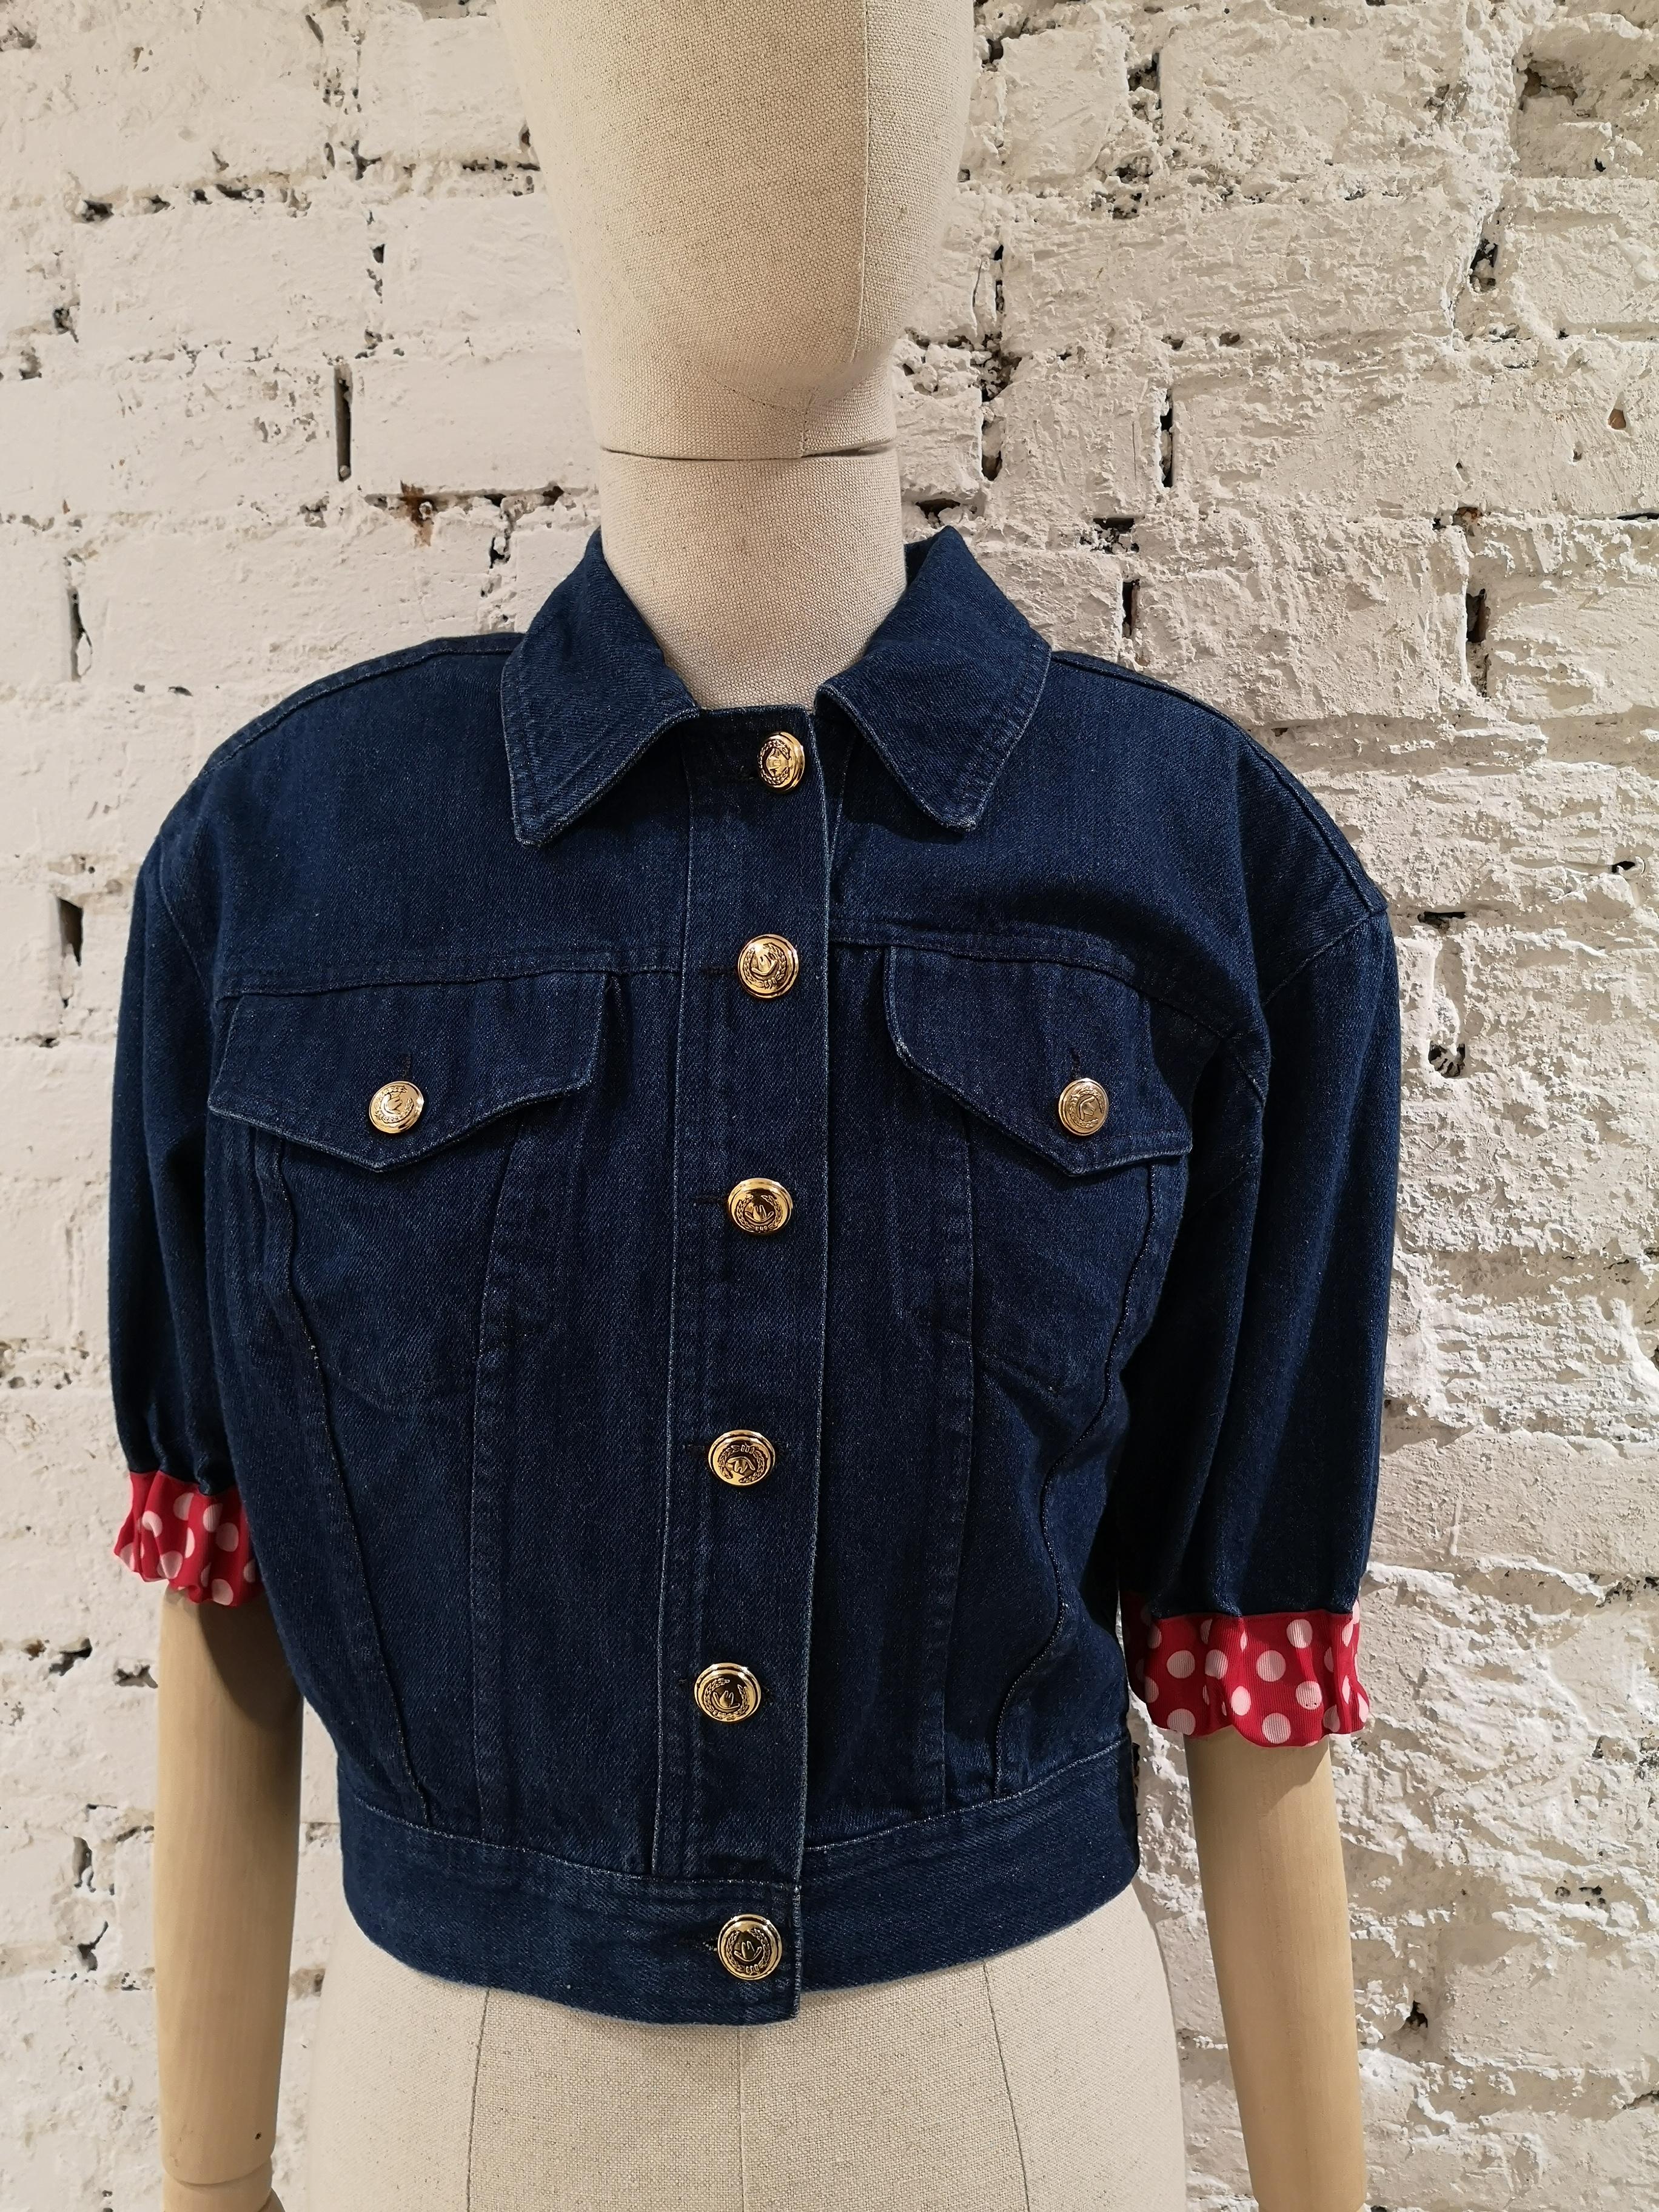 Moschino Denim Short Sleeves Jacket
totally made in italy in size 42
composition: cotton